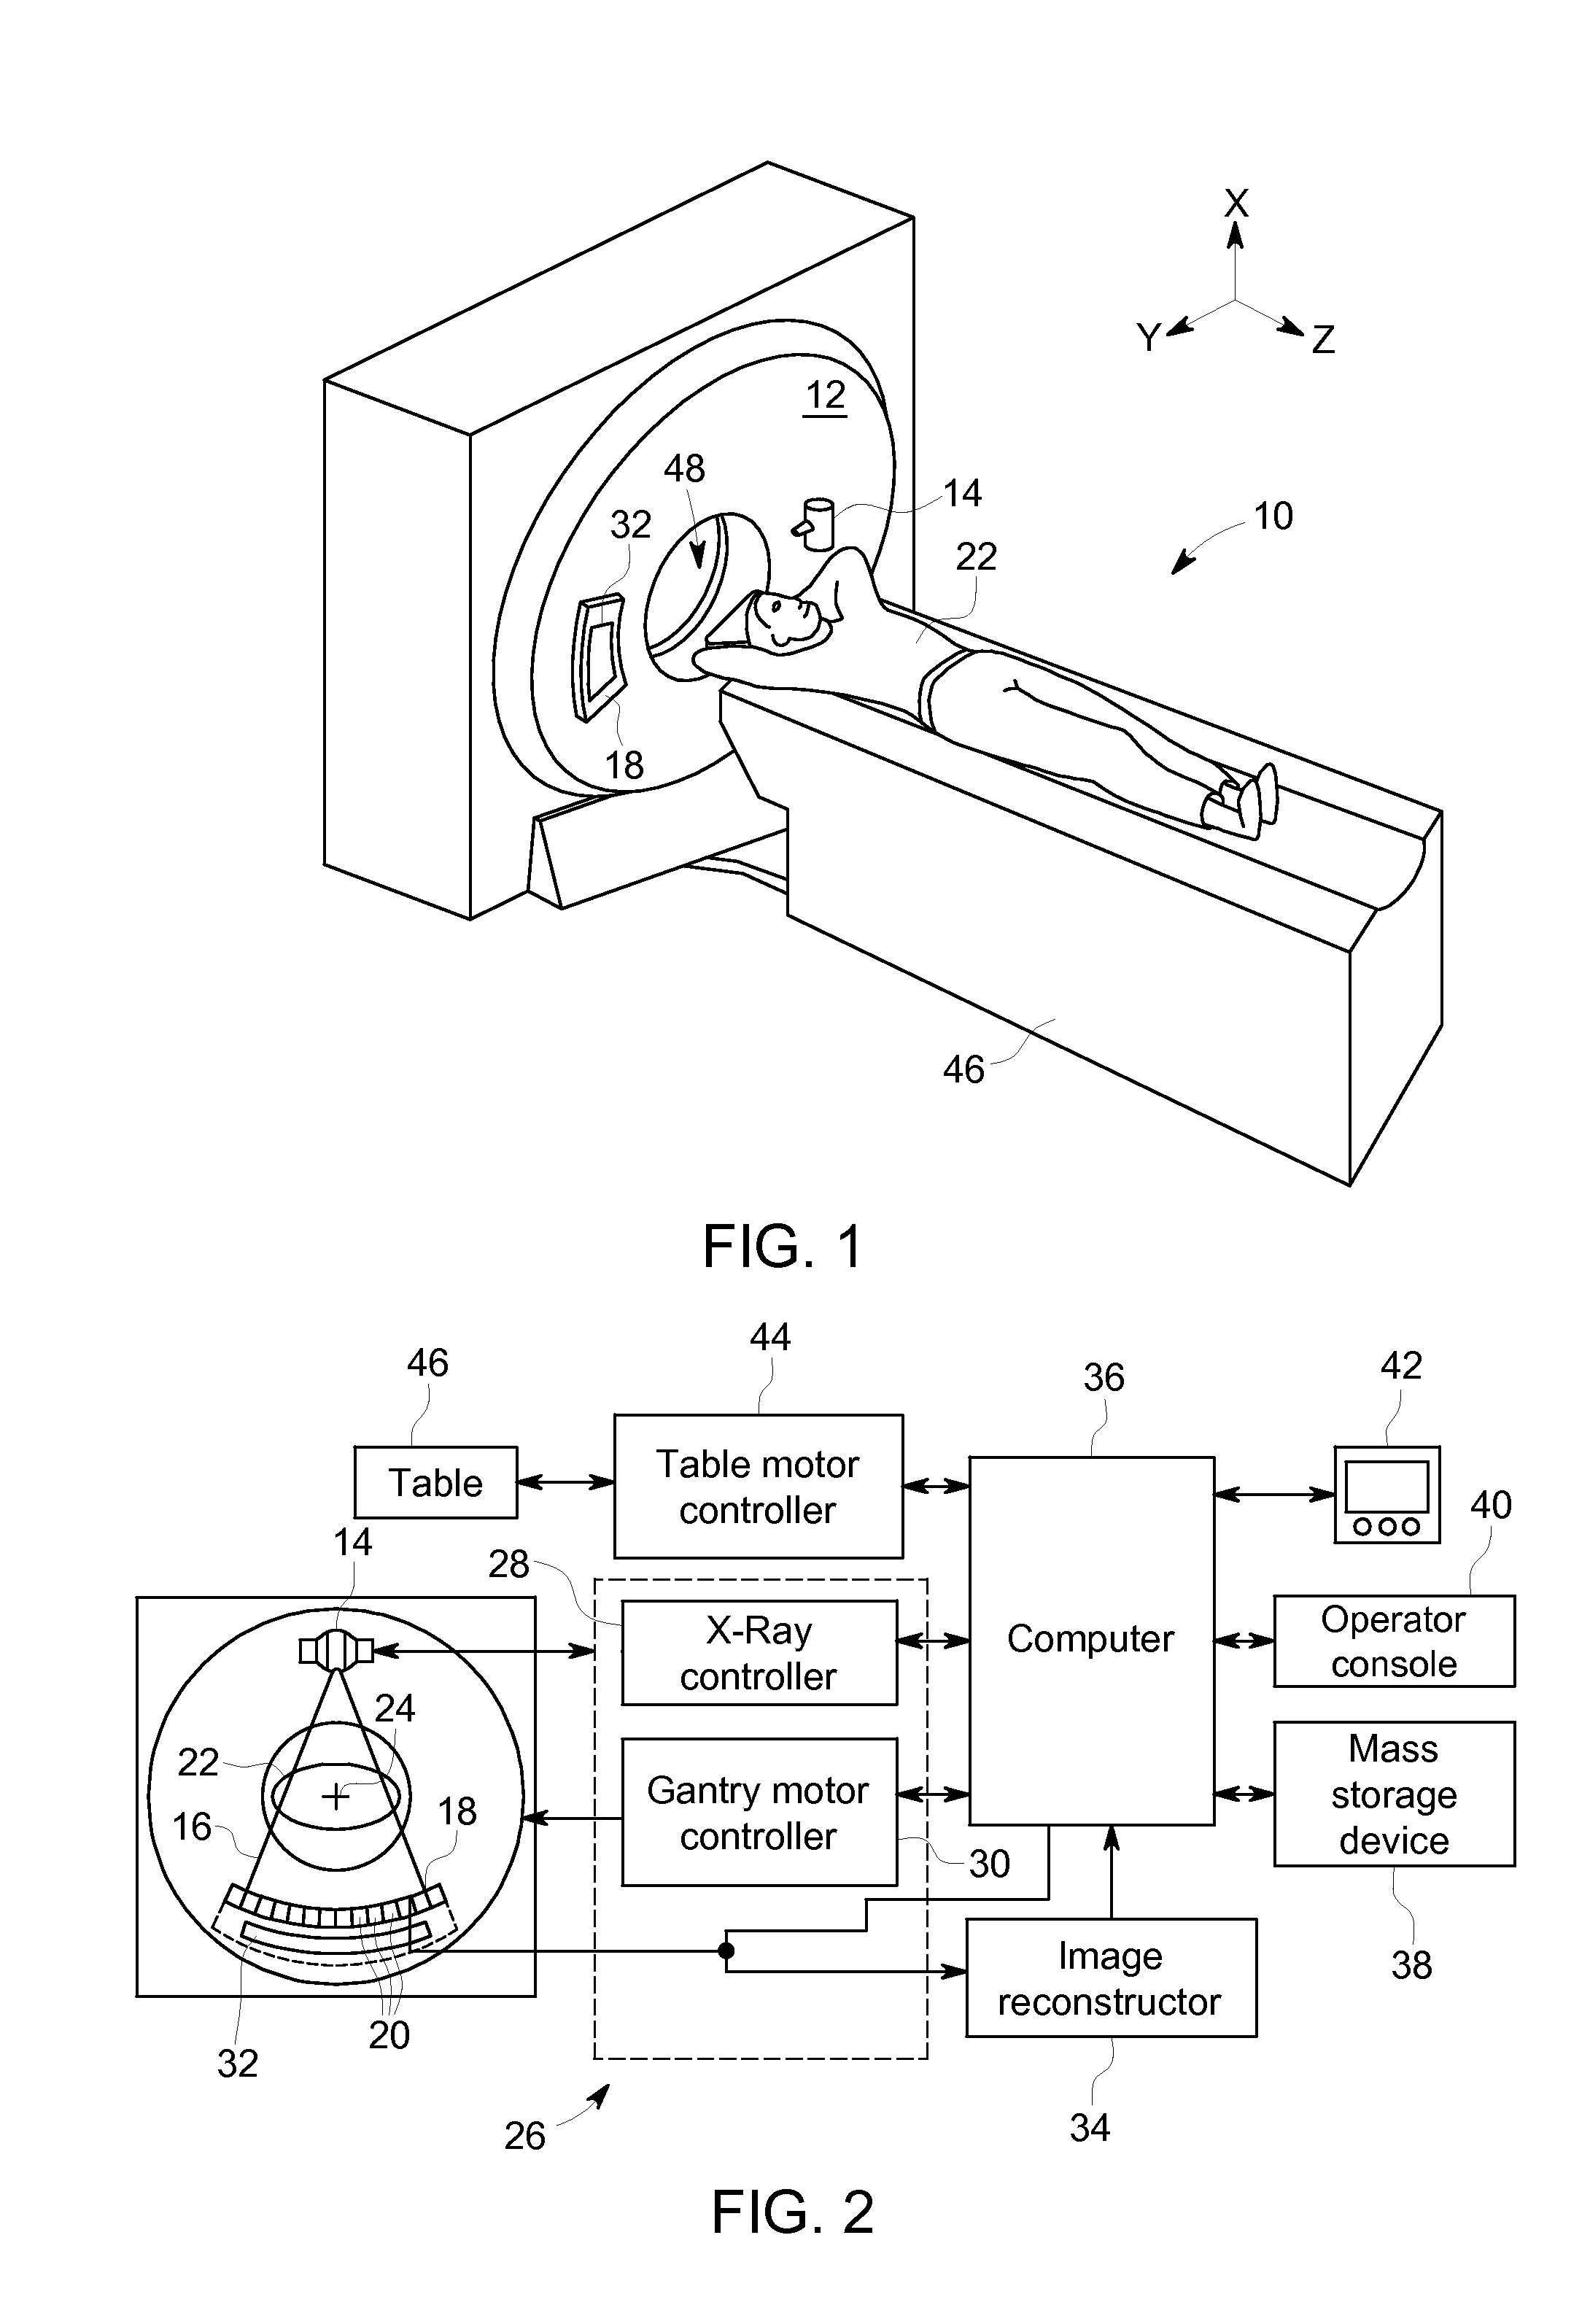 Method and apparatus for reducing artifacts in computed tomography (CT) image reconstruction